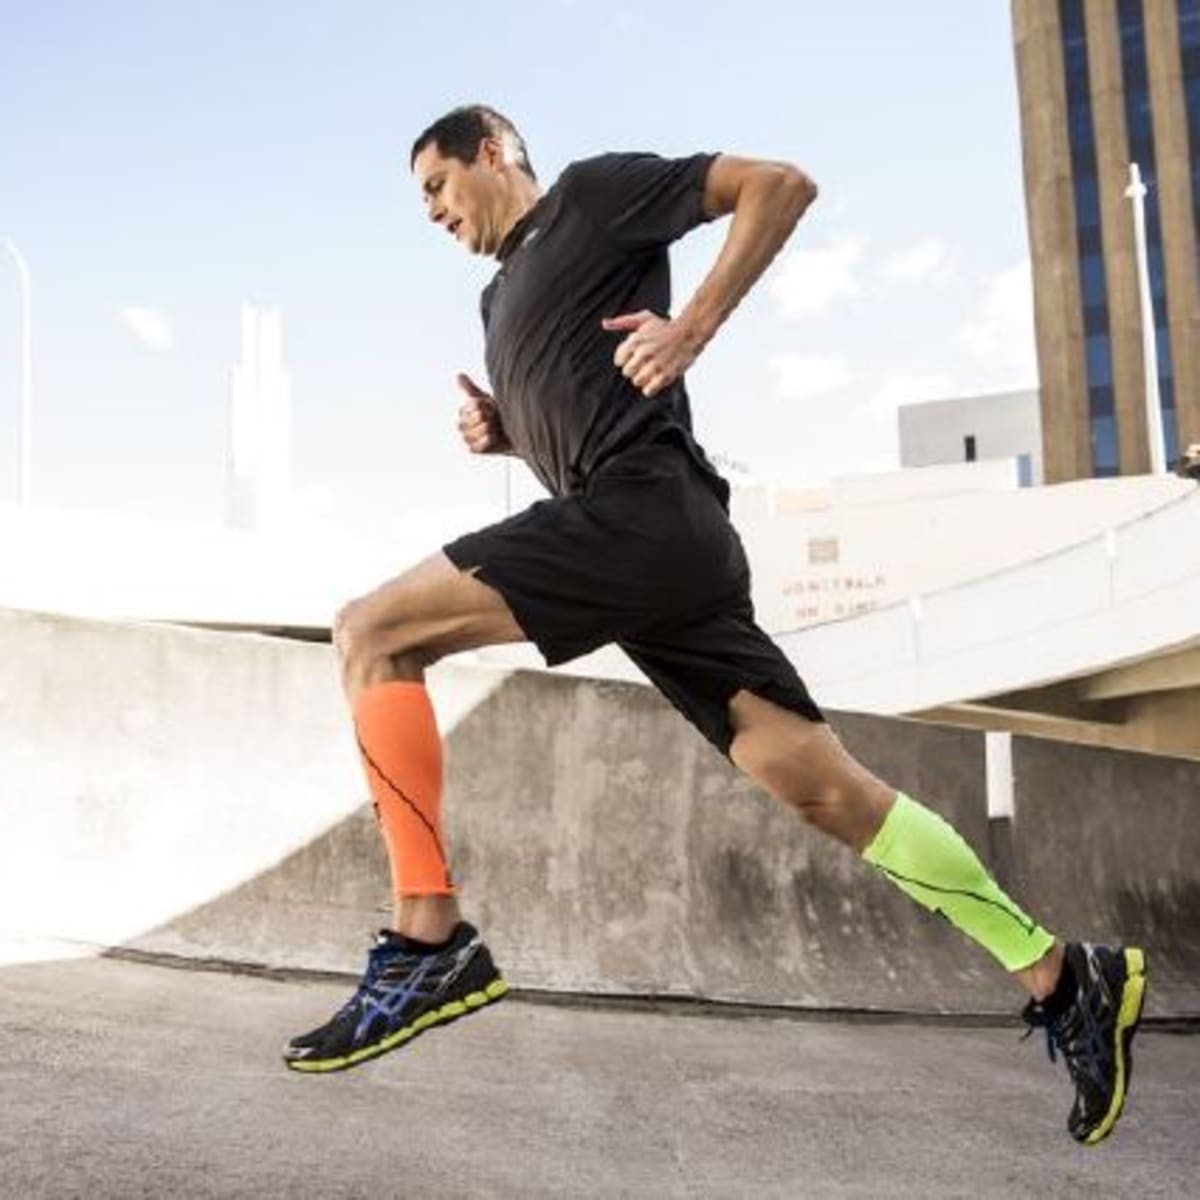 The best compression clothes for athletes, runners, and more